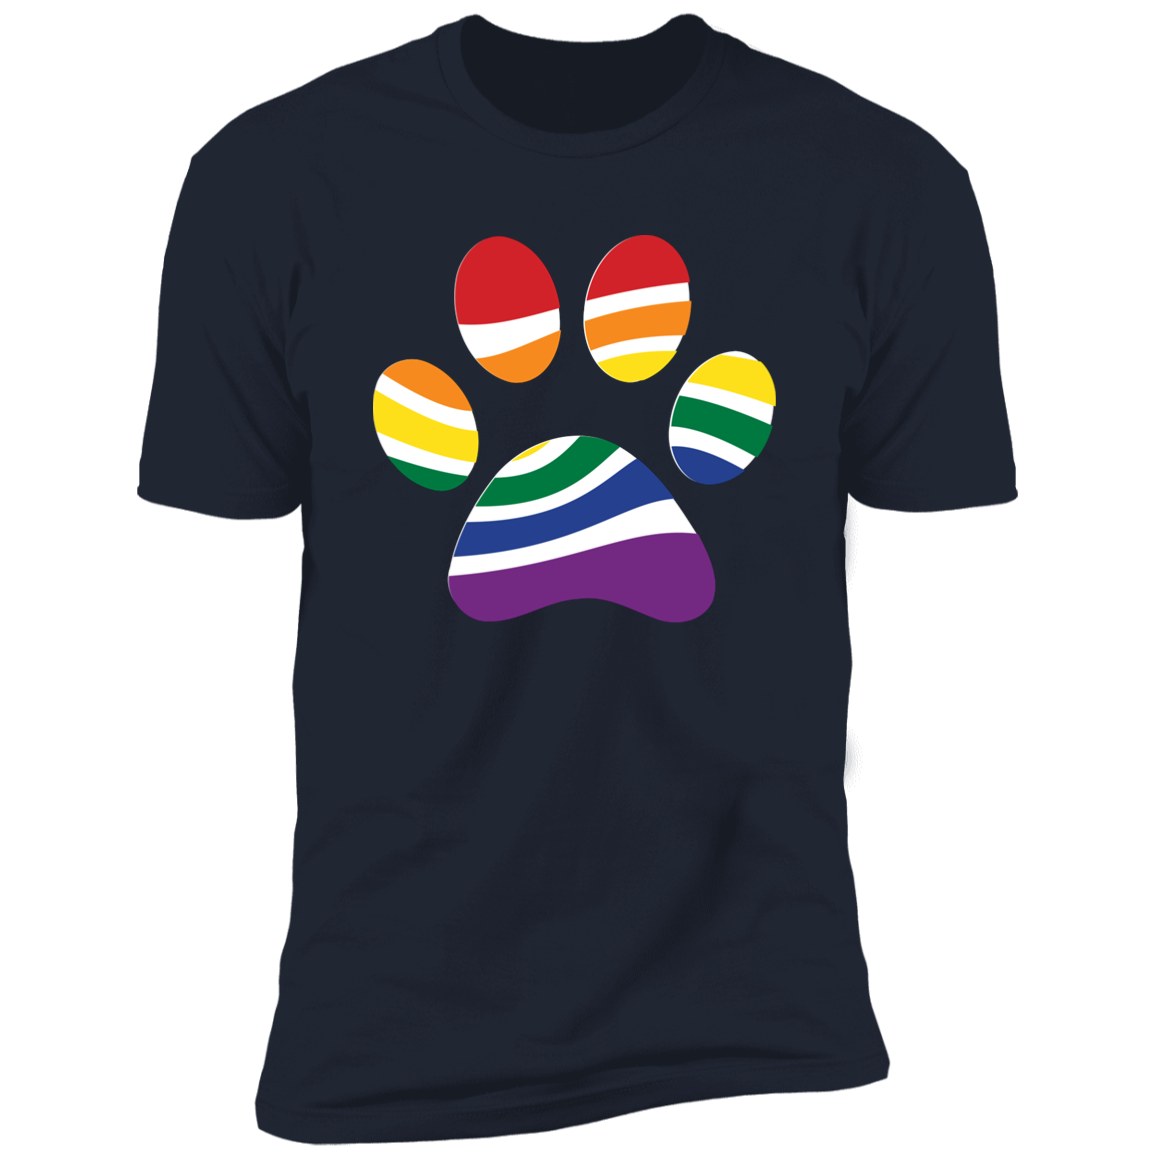 Pride Paw (Retro) Pride T-shirt, Paw Pride Dog Shirt for humans, in navy blue